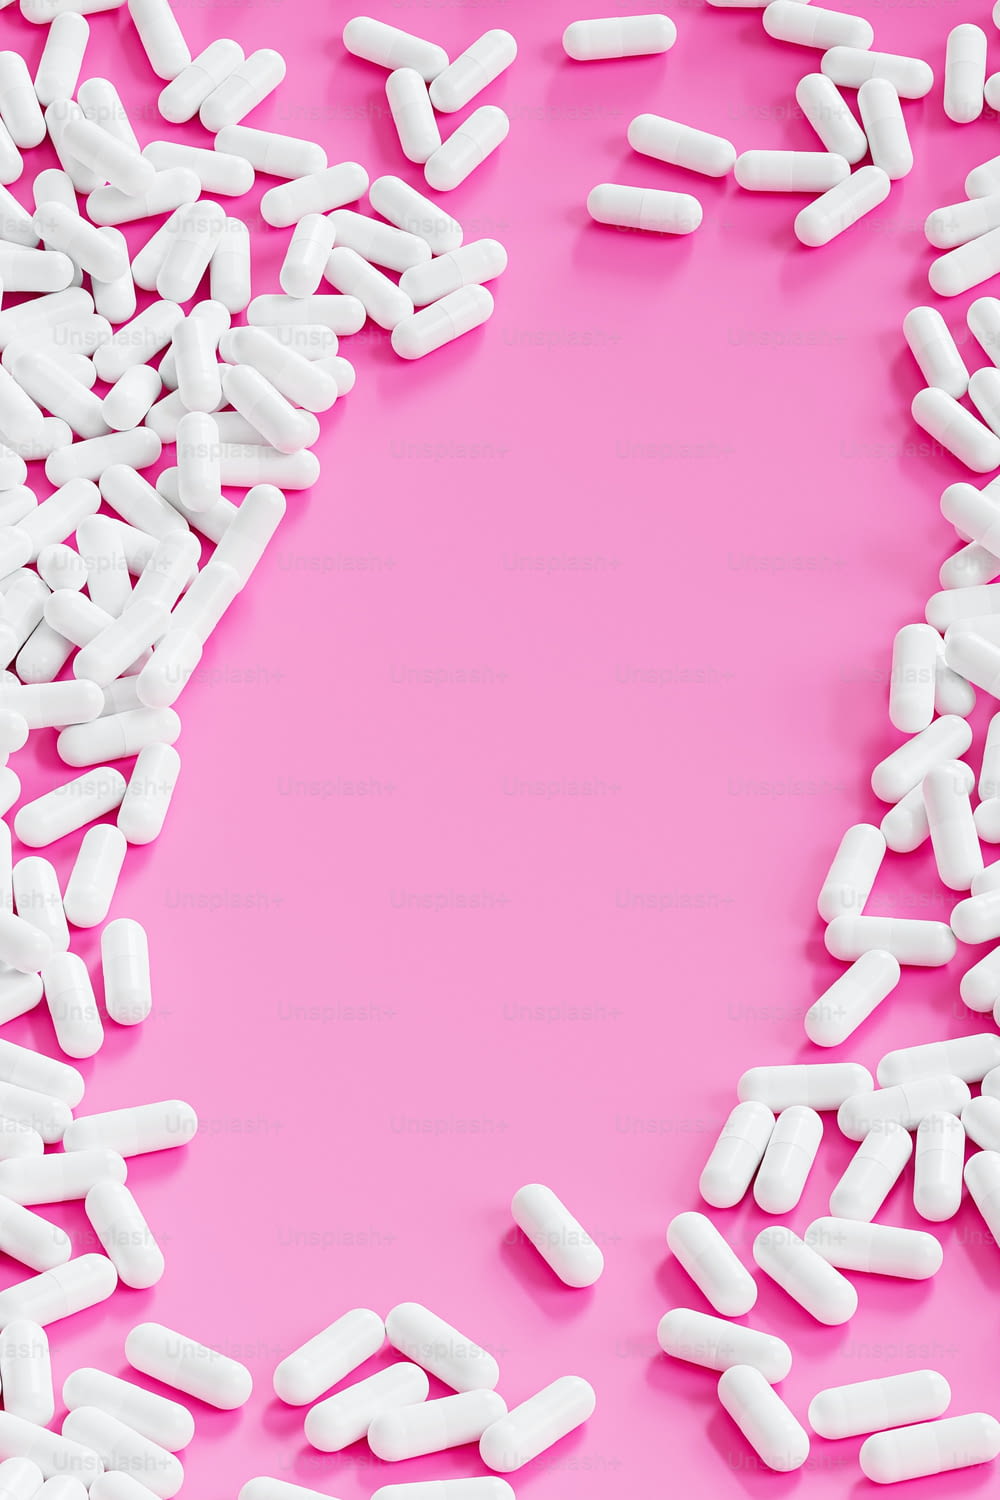 a pink background with white pills on it